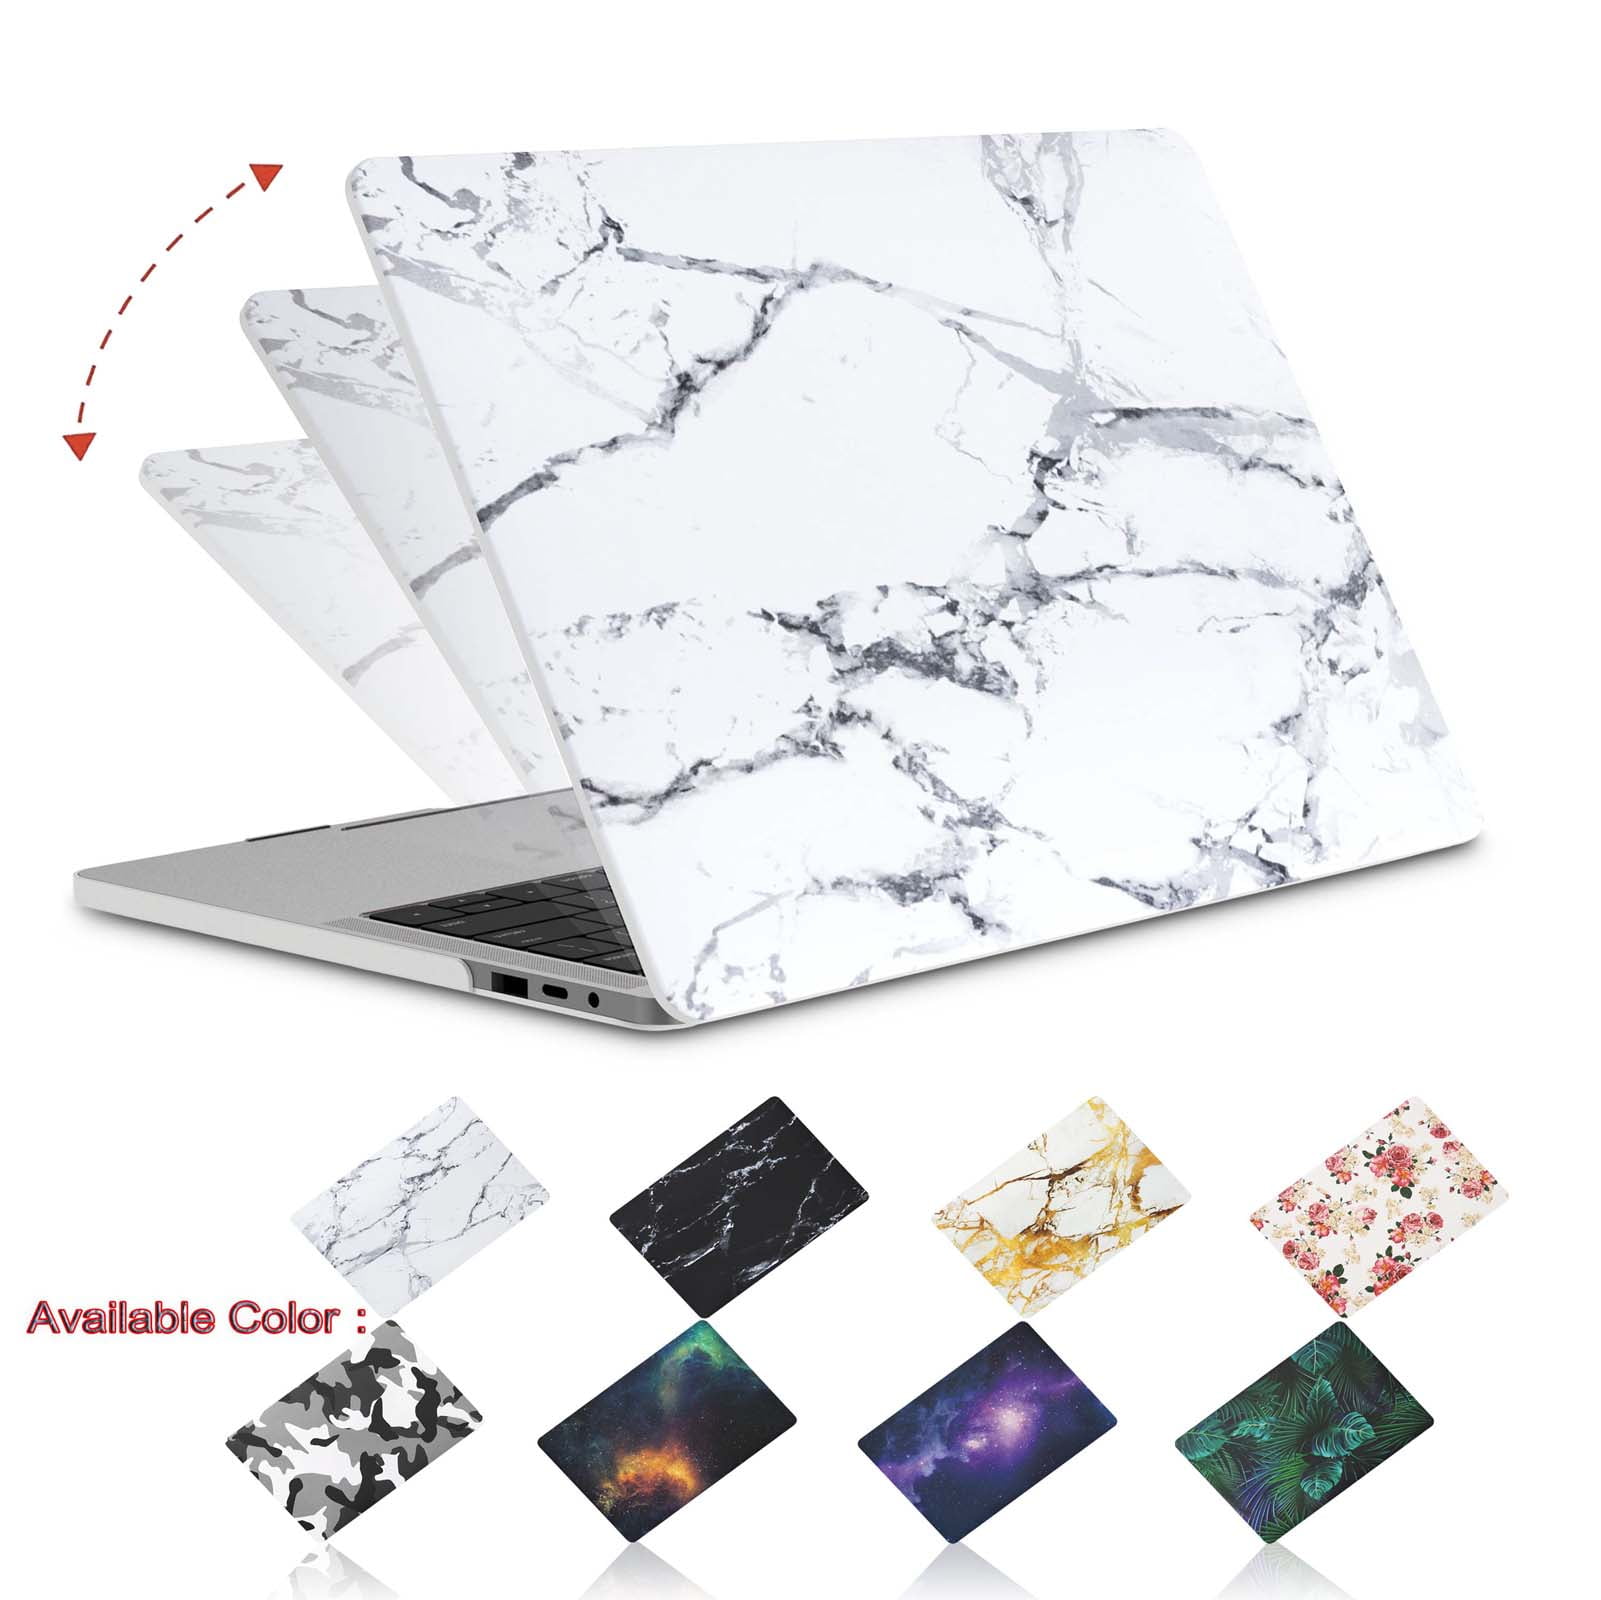 Old MacBook Pro 13 inch Retina Case A1502/A1425, Tekcoo Laptop Case Camouflage Design, Plastic Hard Shell Protective Case for Old MacBook Pro 13.3